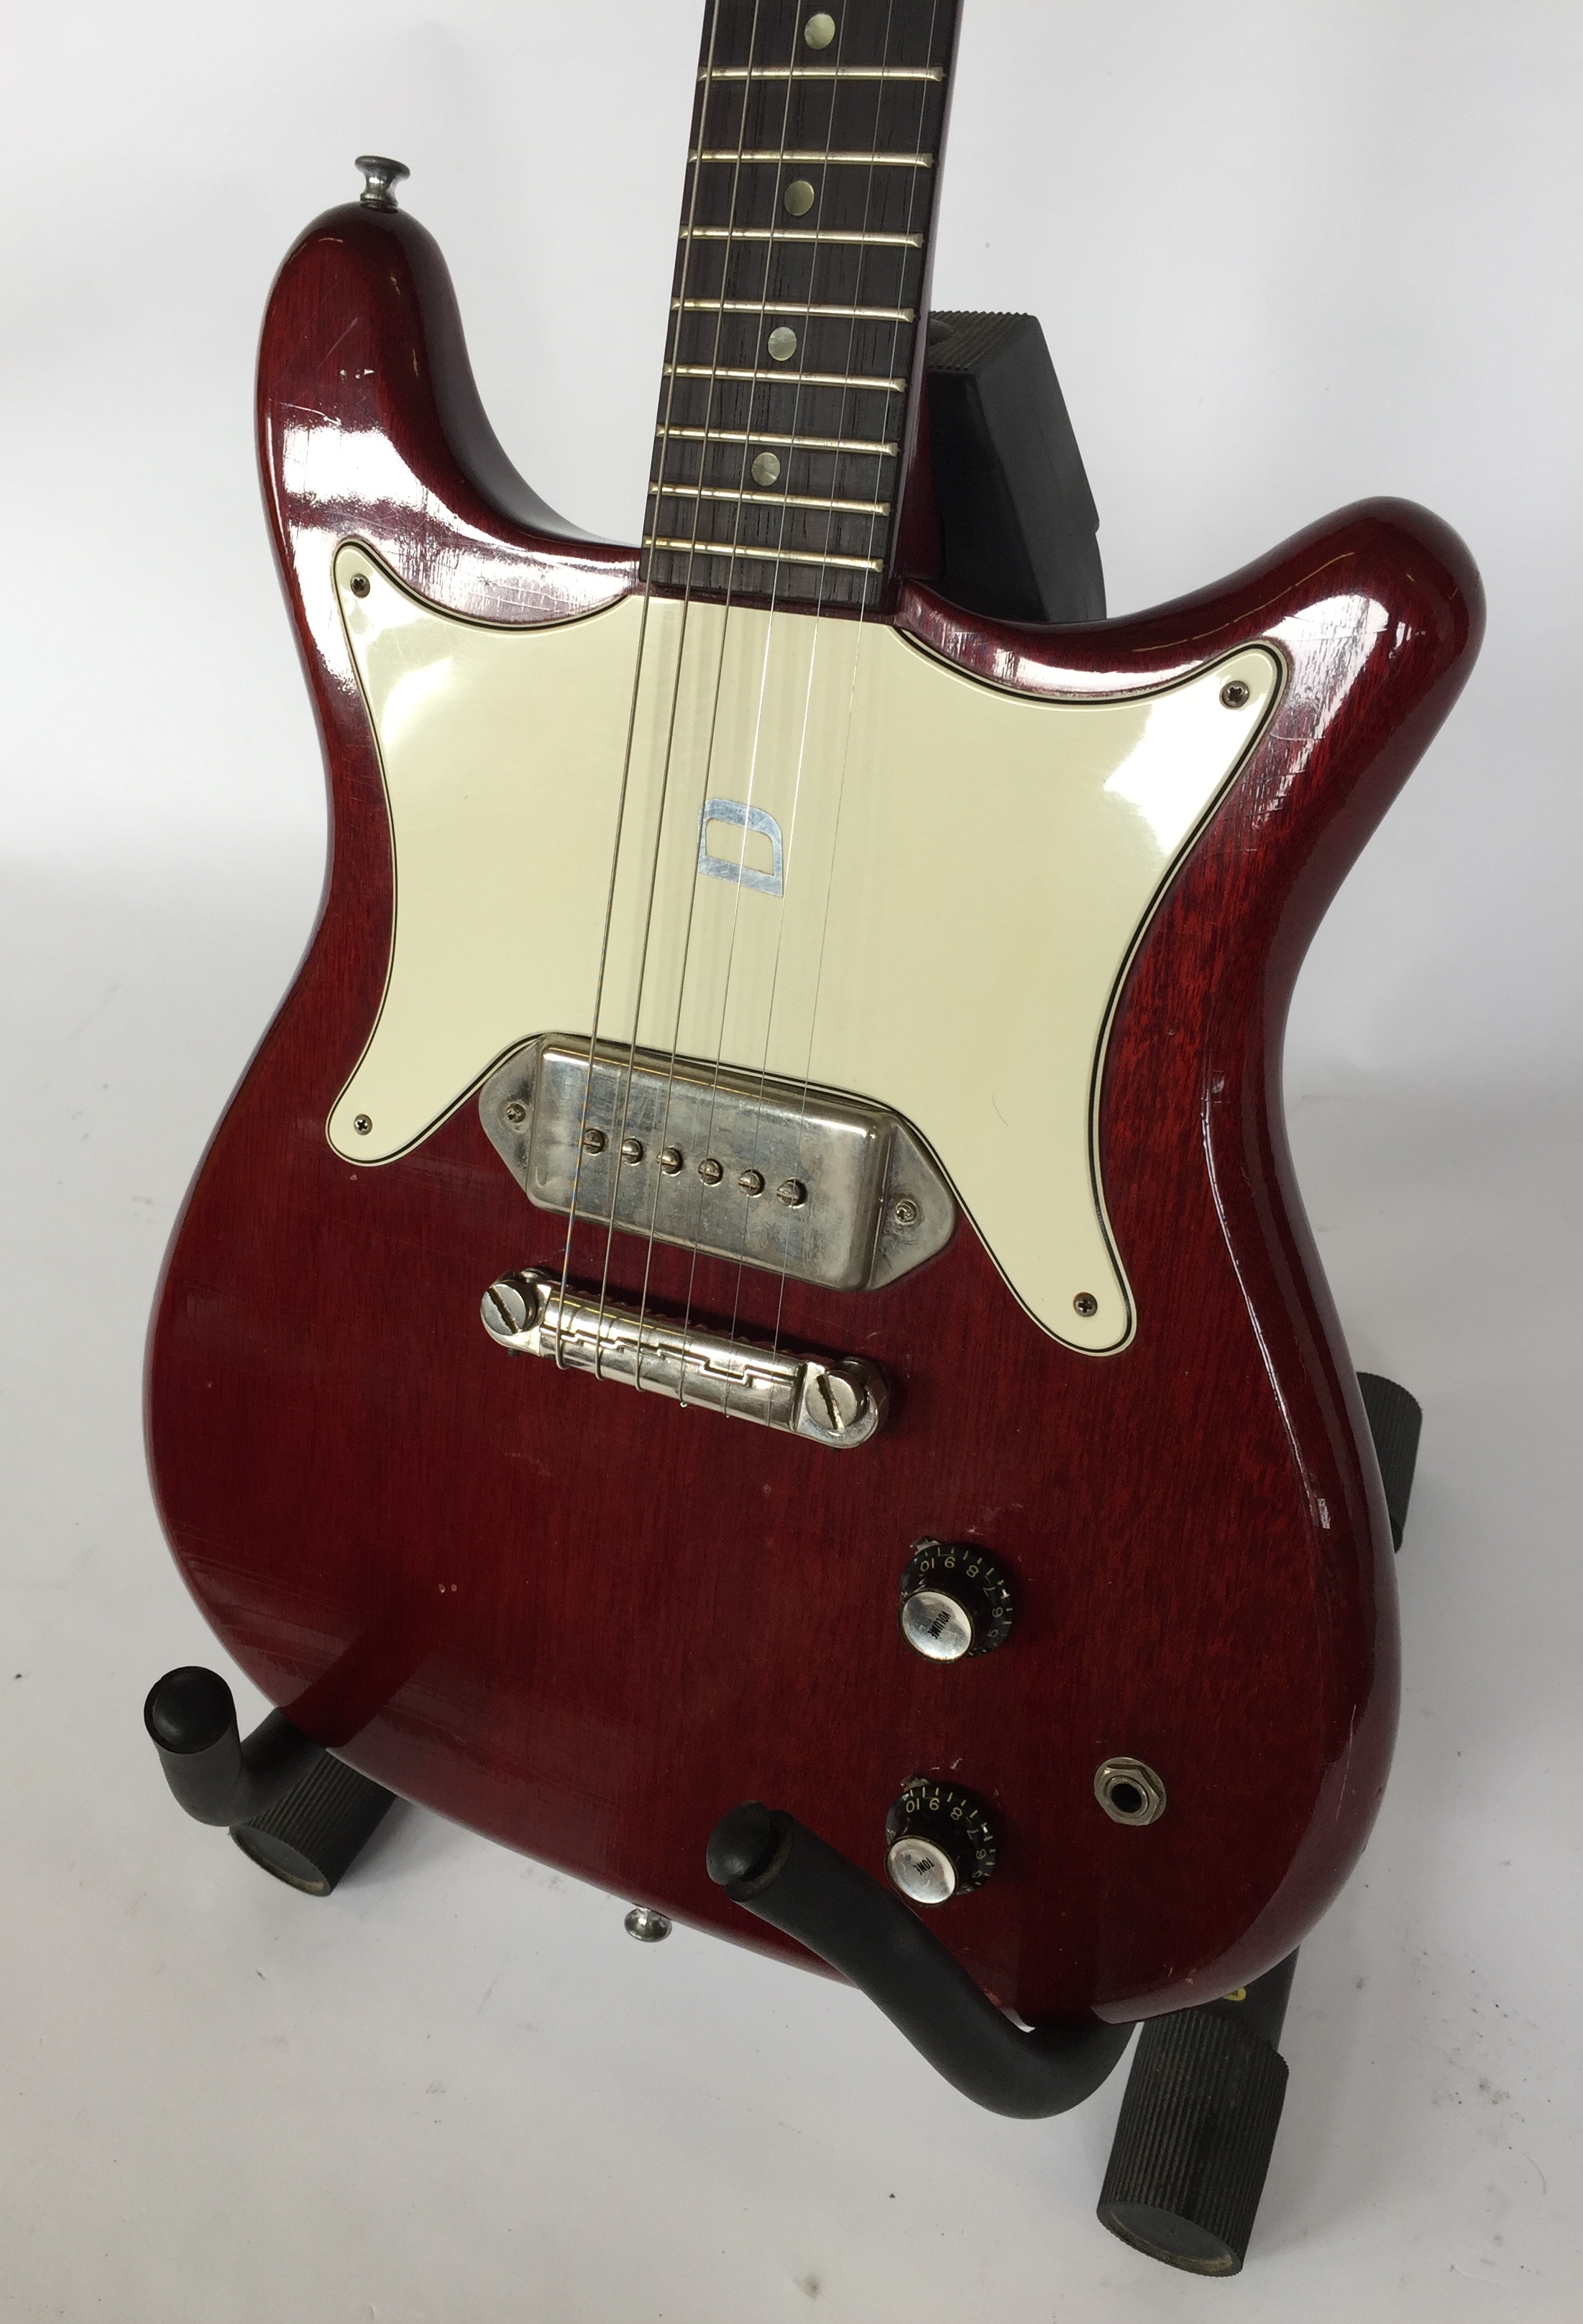 DWIGHT CORONET 1965 ELECTRIC GUITAR ***TEMPORARILY WITHDRAWN UNTIL RECEIPT OF CITES ARTICLE 10 - Image 2 of 7